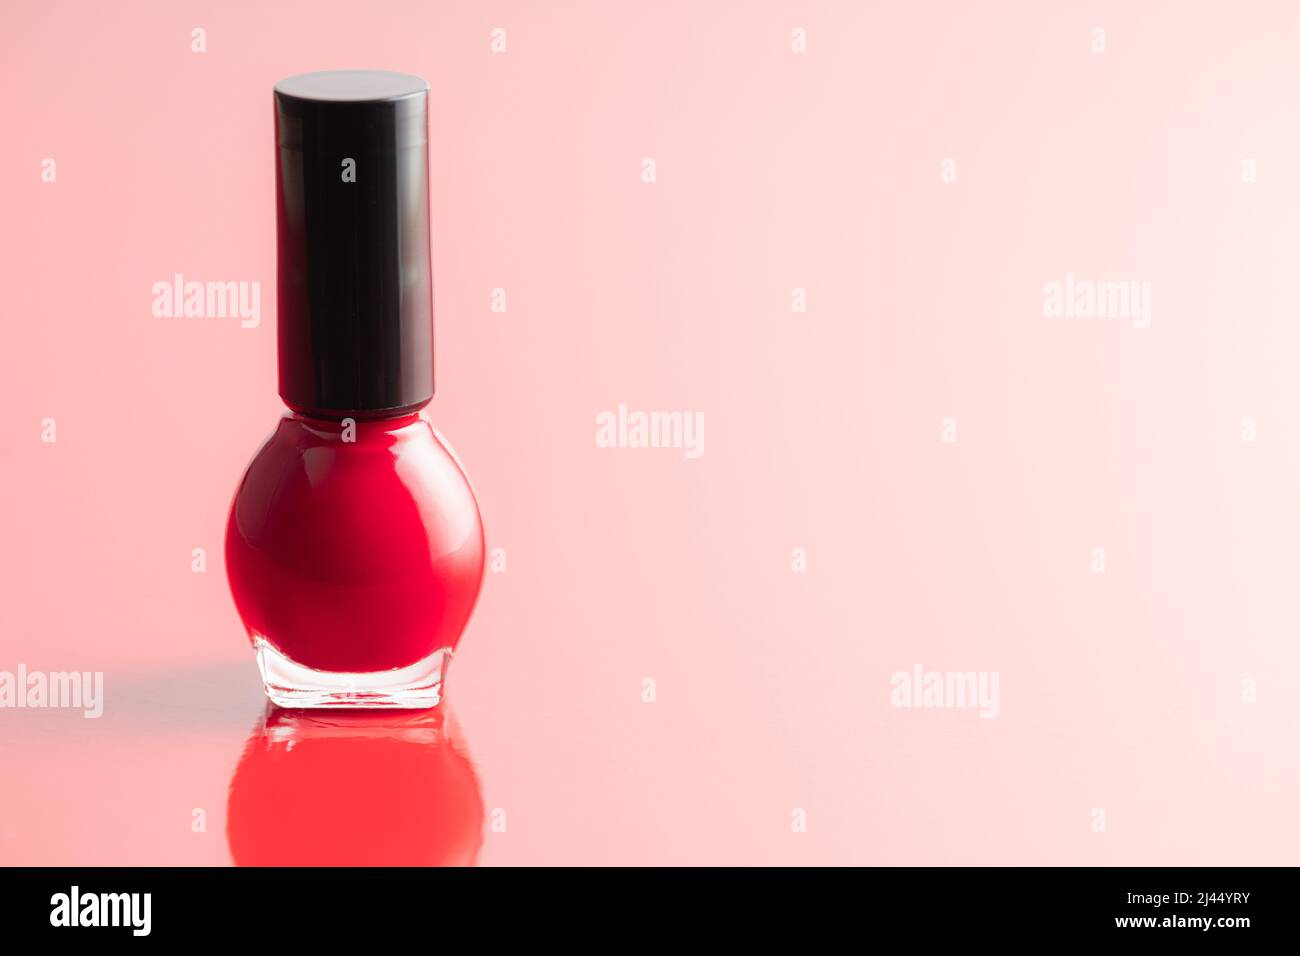 Colorful nail polish bottles on a red background. Stock Photo